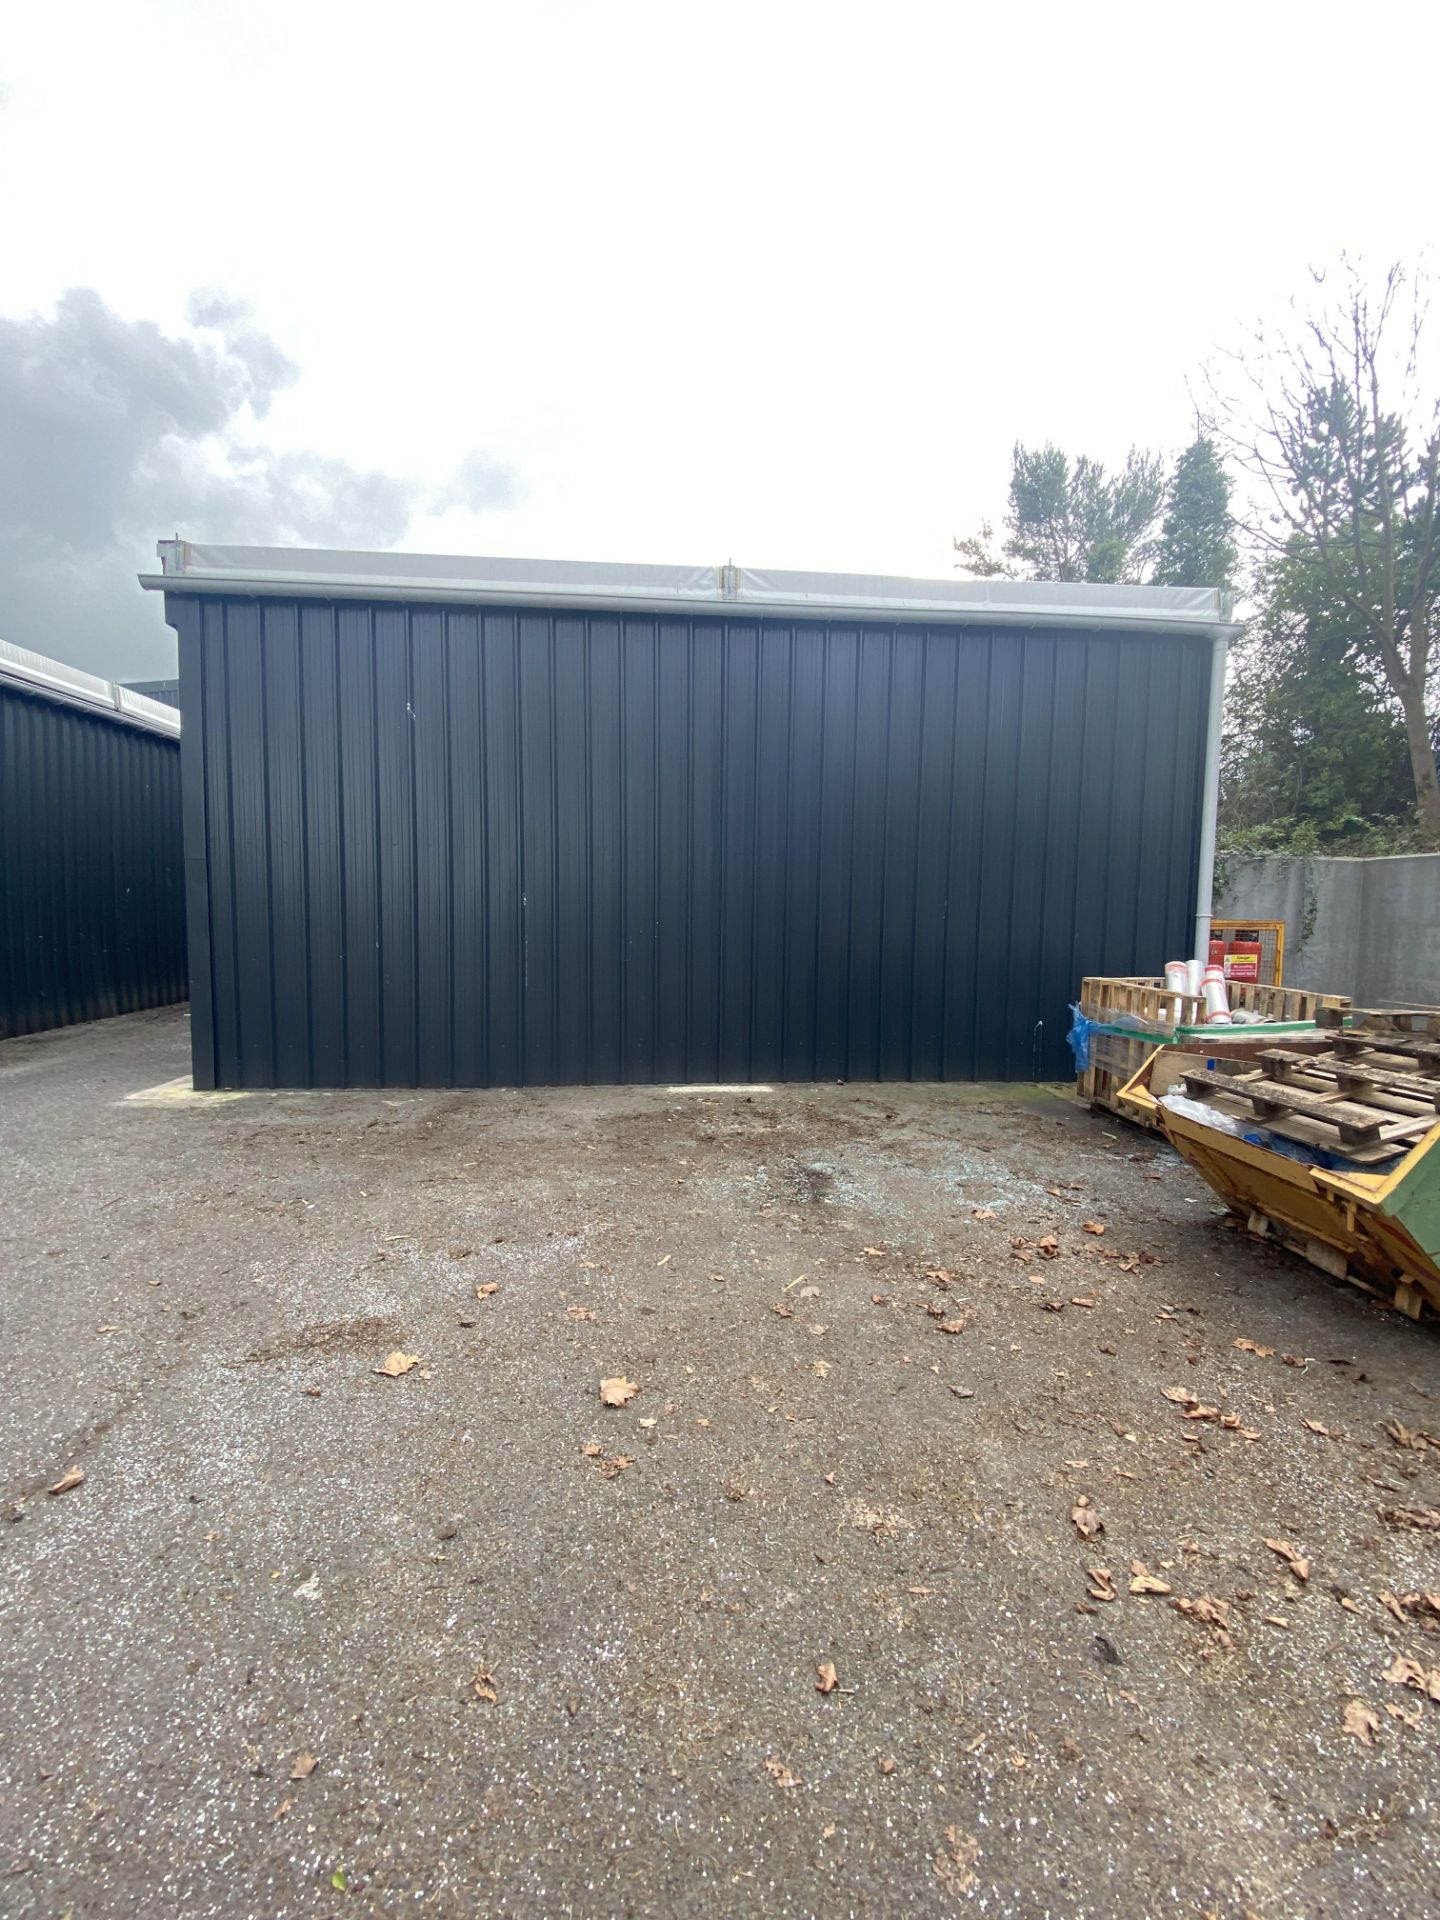 ALLOY PORTAL FRAMED TEMPORARY INDUSTRIAL BUILDING, approx. 14.7m x 9.8m x 4.8m high (eaves), 7.3m to - Image 2 of 9